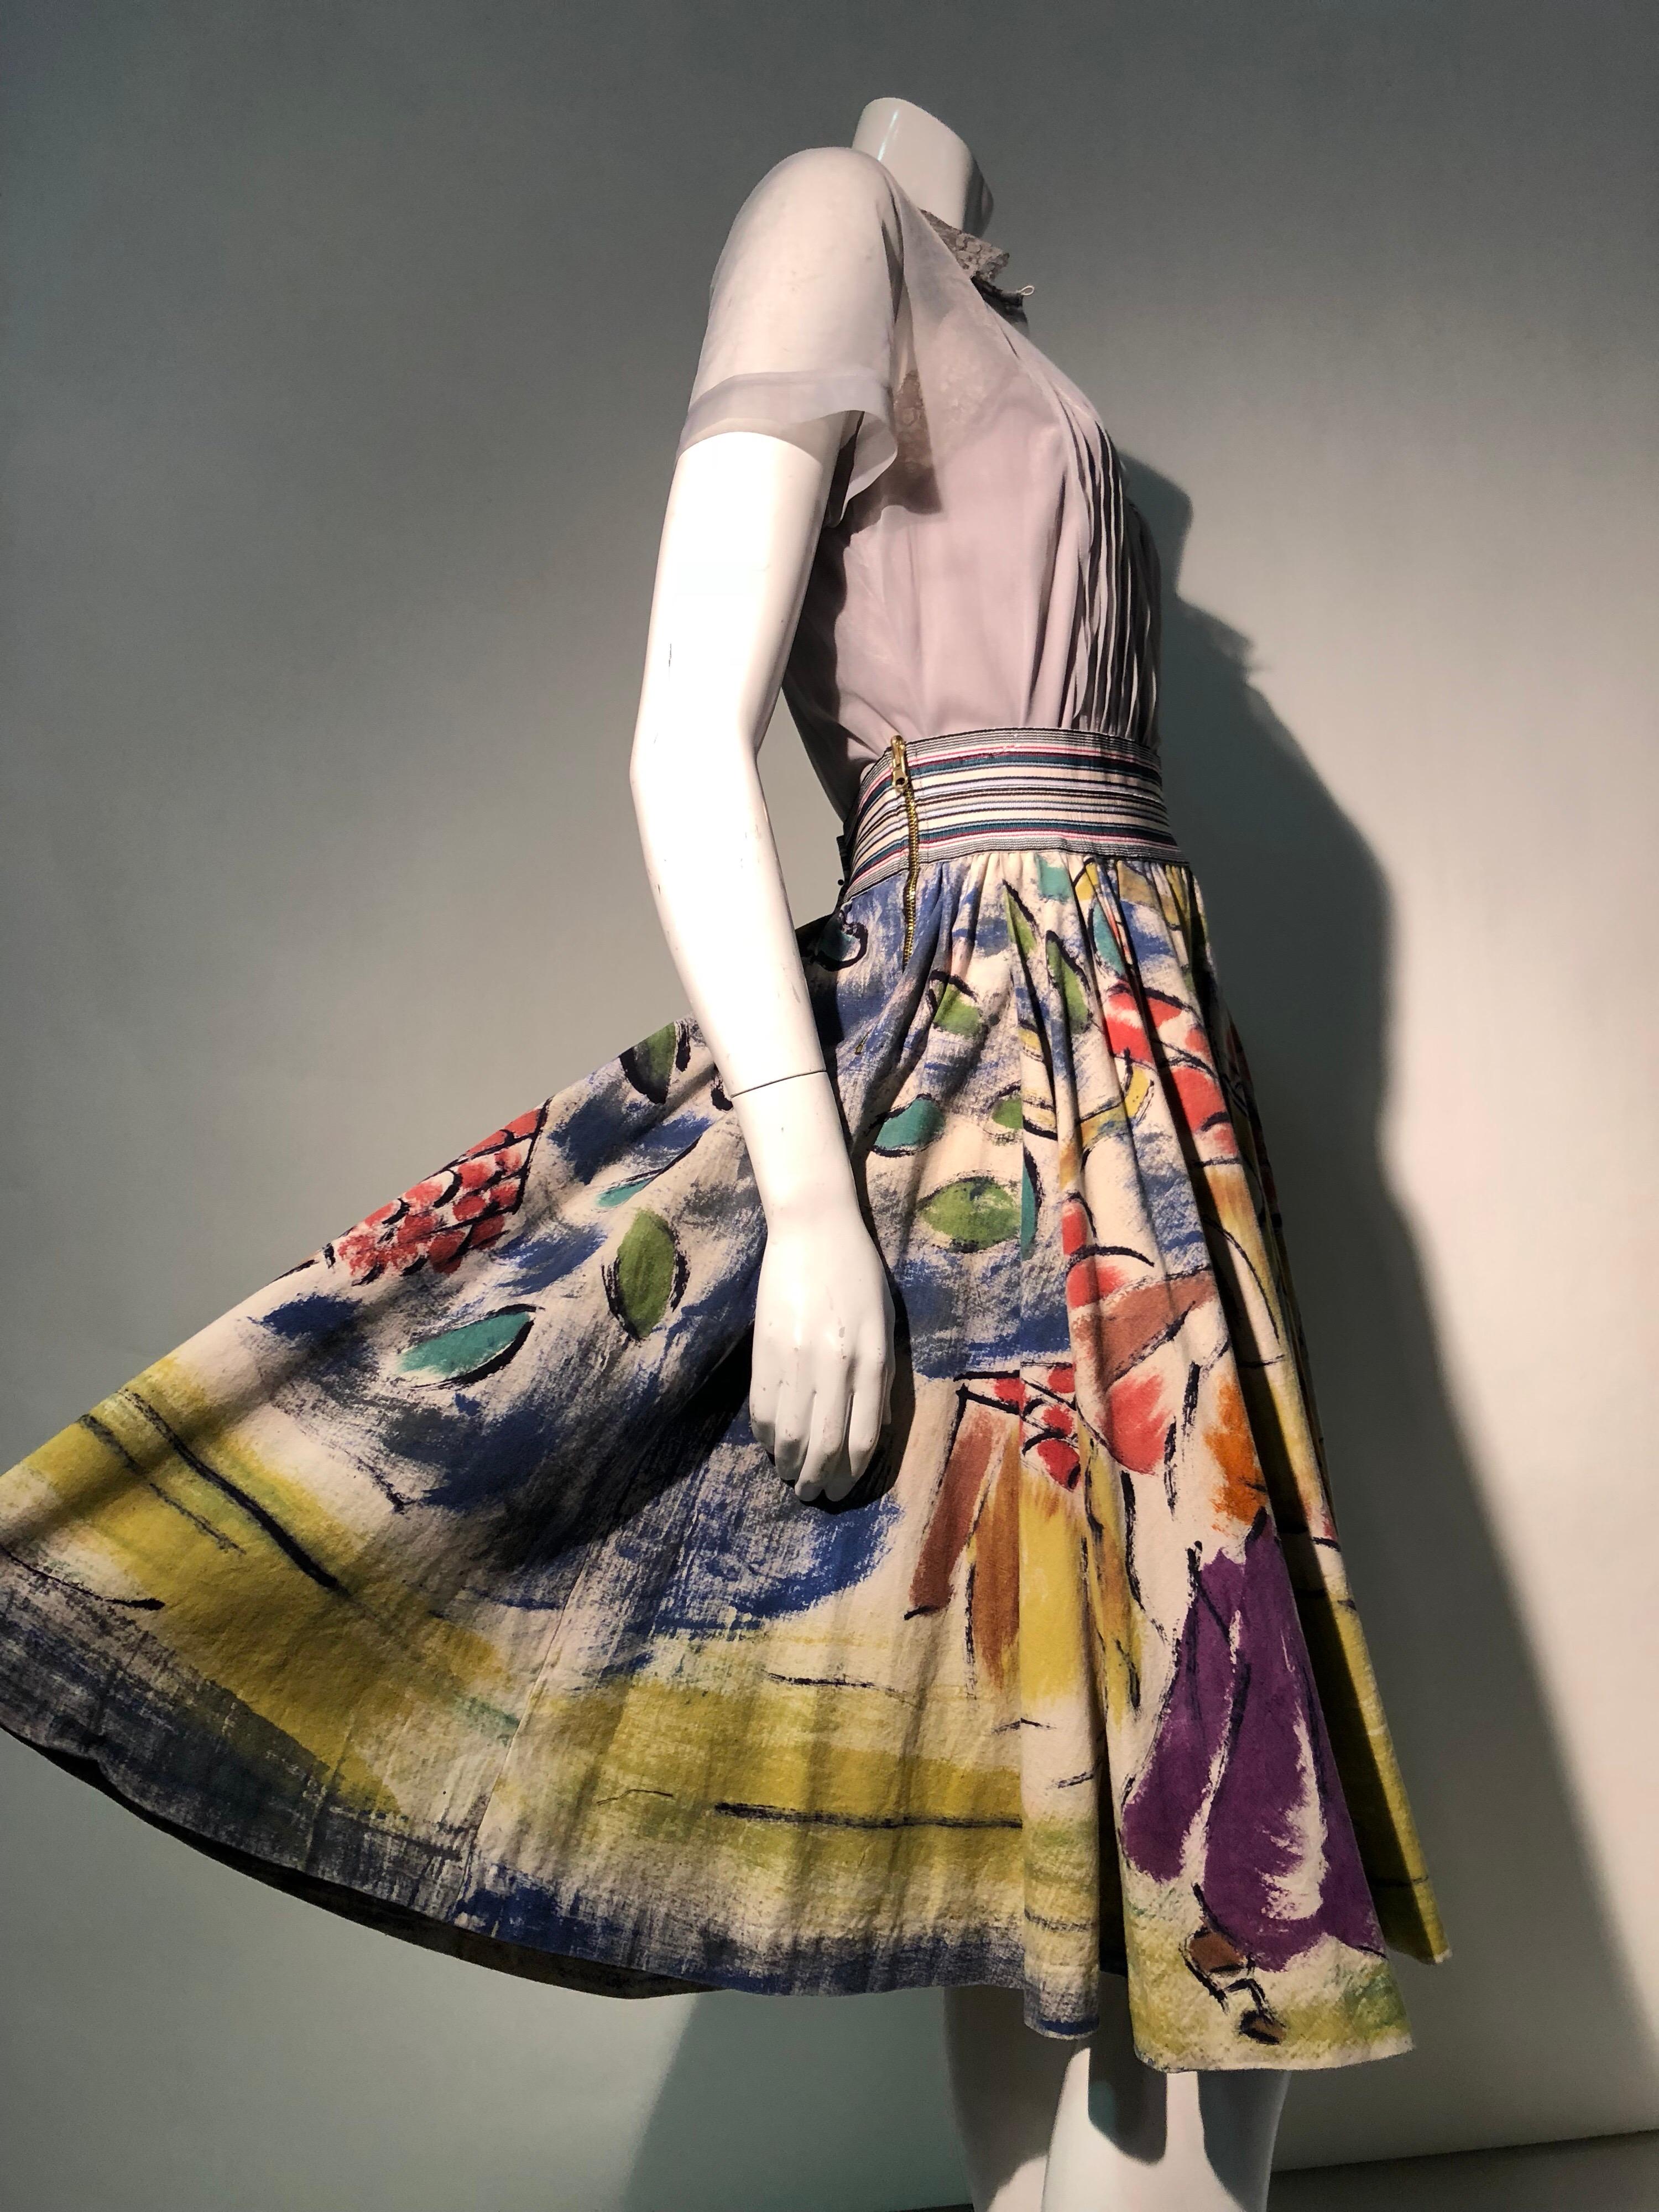 A wonderful 1950s pairing: a colorful hand-painted Mexican cotton circle skirt with a village scene and 